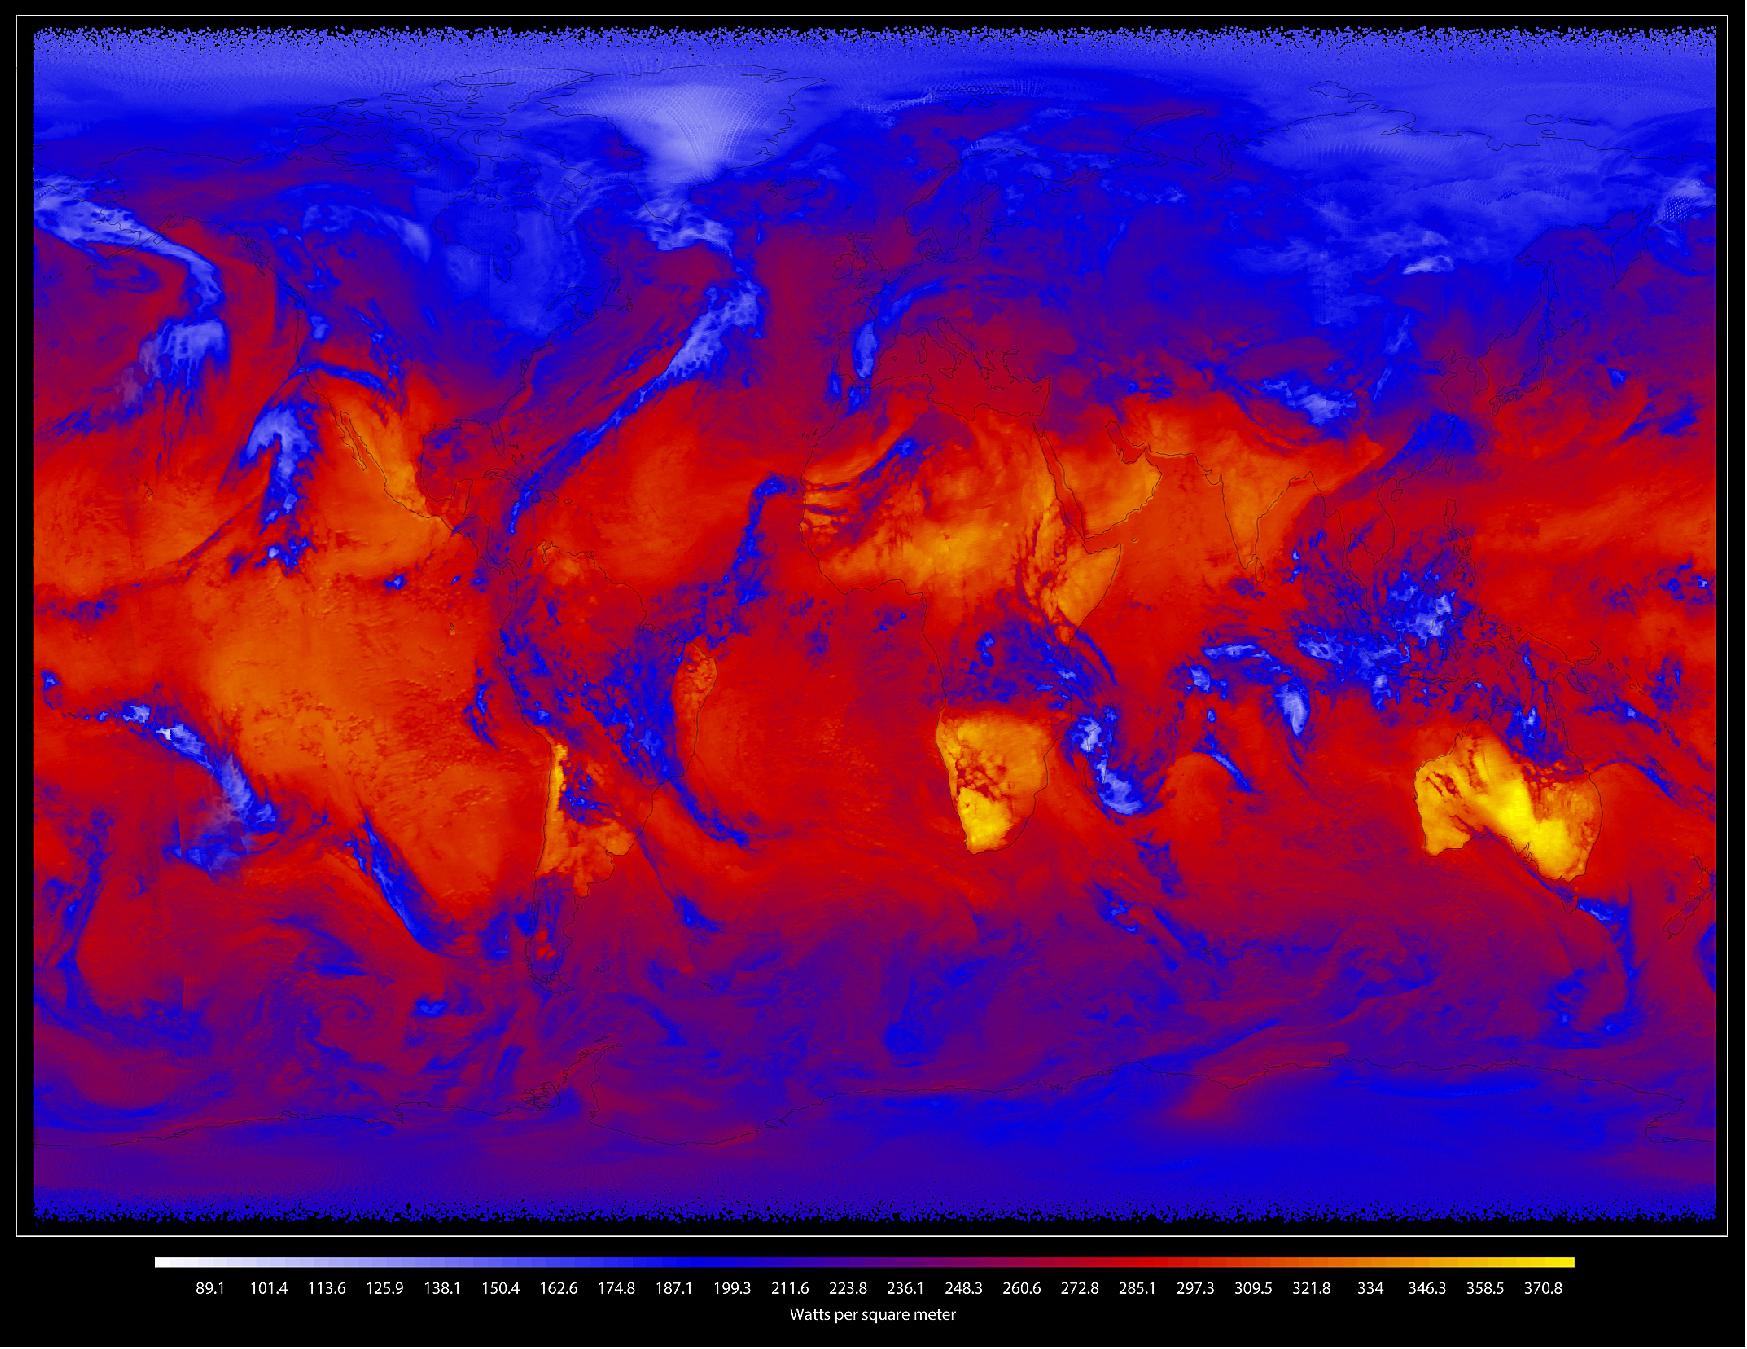 Figure 48: In this longwave image from CERES FM6, heat energy radiated from Earth is represented by shades of yellow, red, blue and white. Bright yellow regions are the hottest and emit the most energy out to space. Dark blue and bright white regions, which represent clouds, are much colder and emit the least energy (image credit: NASA)